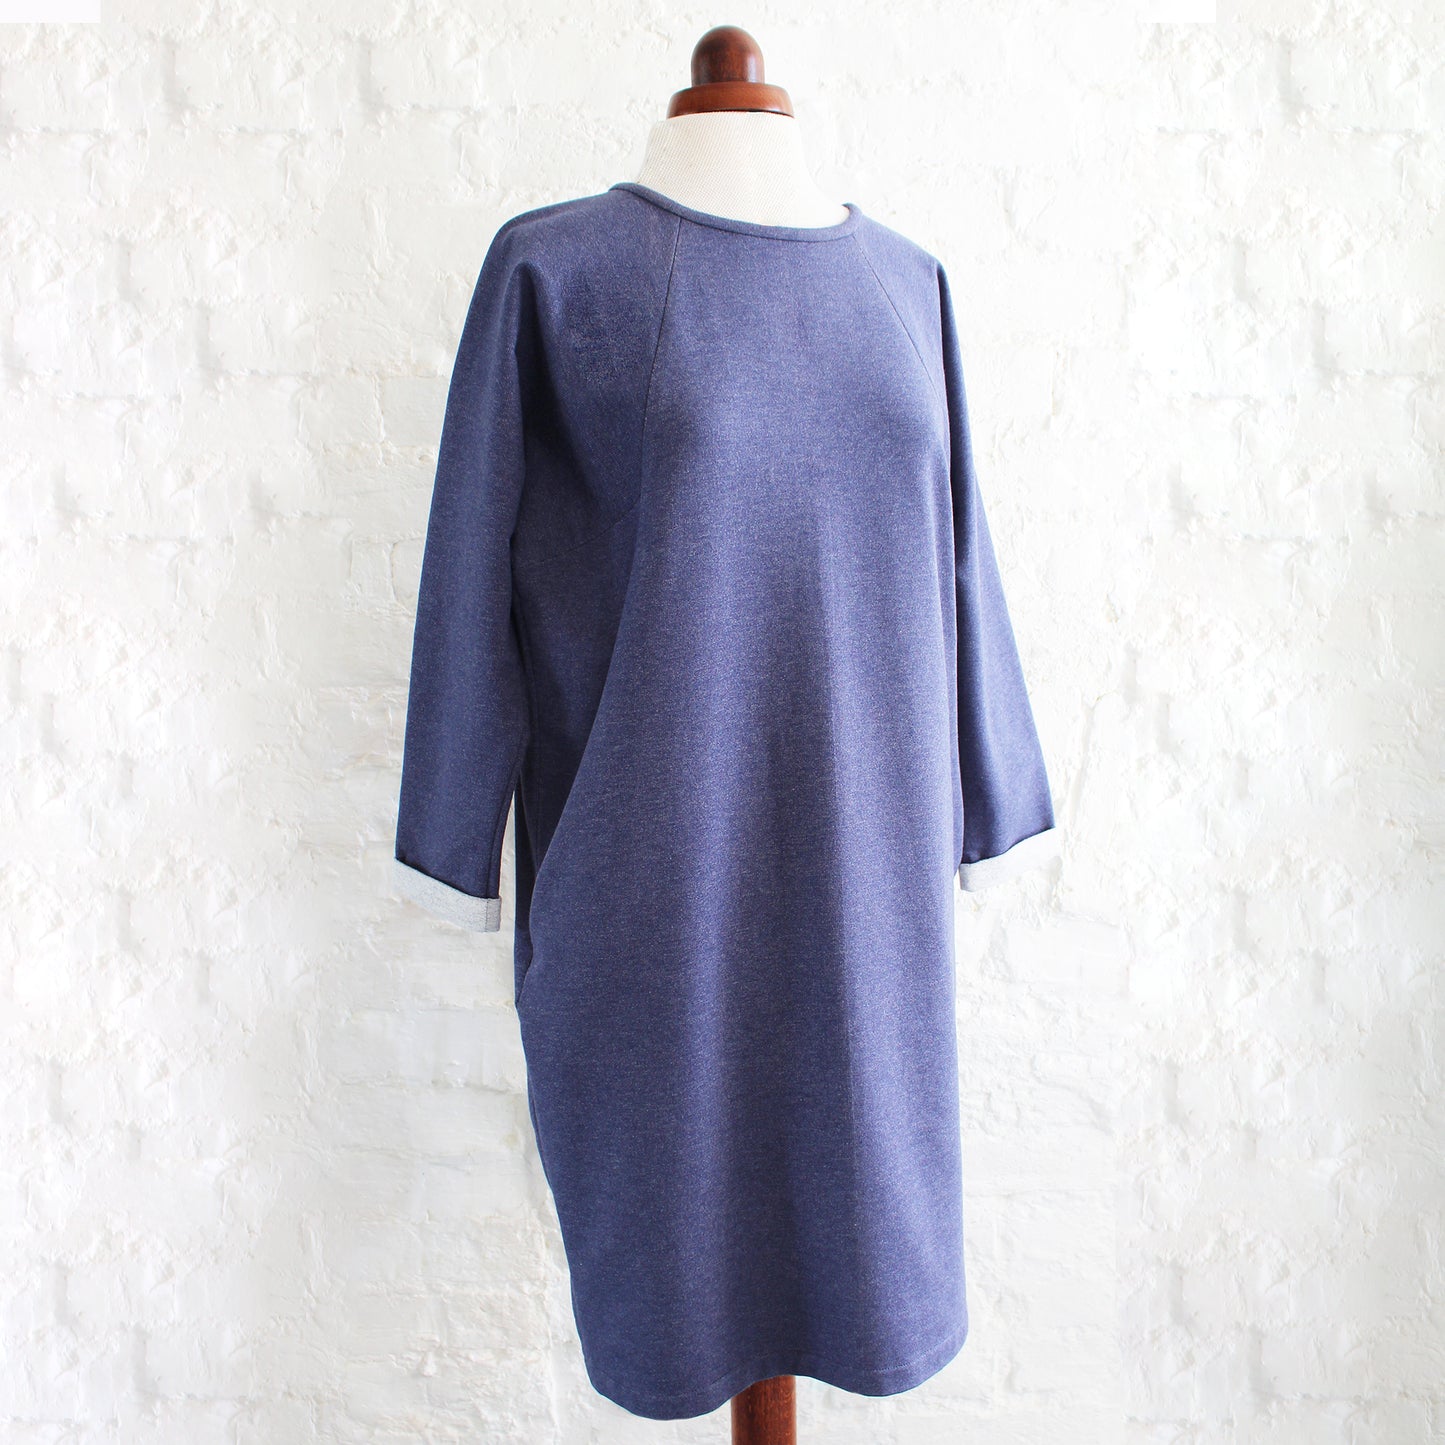 COCOON DRESS sewing pattern